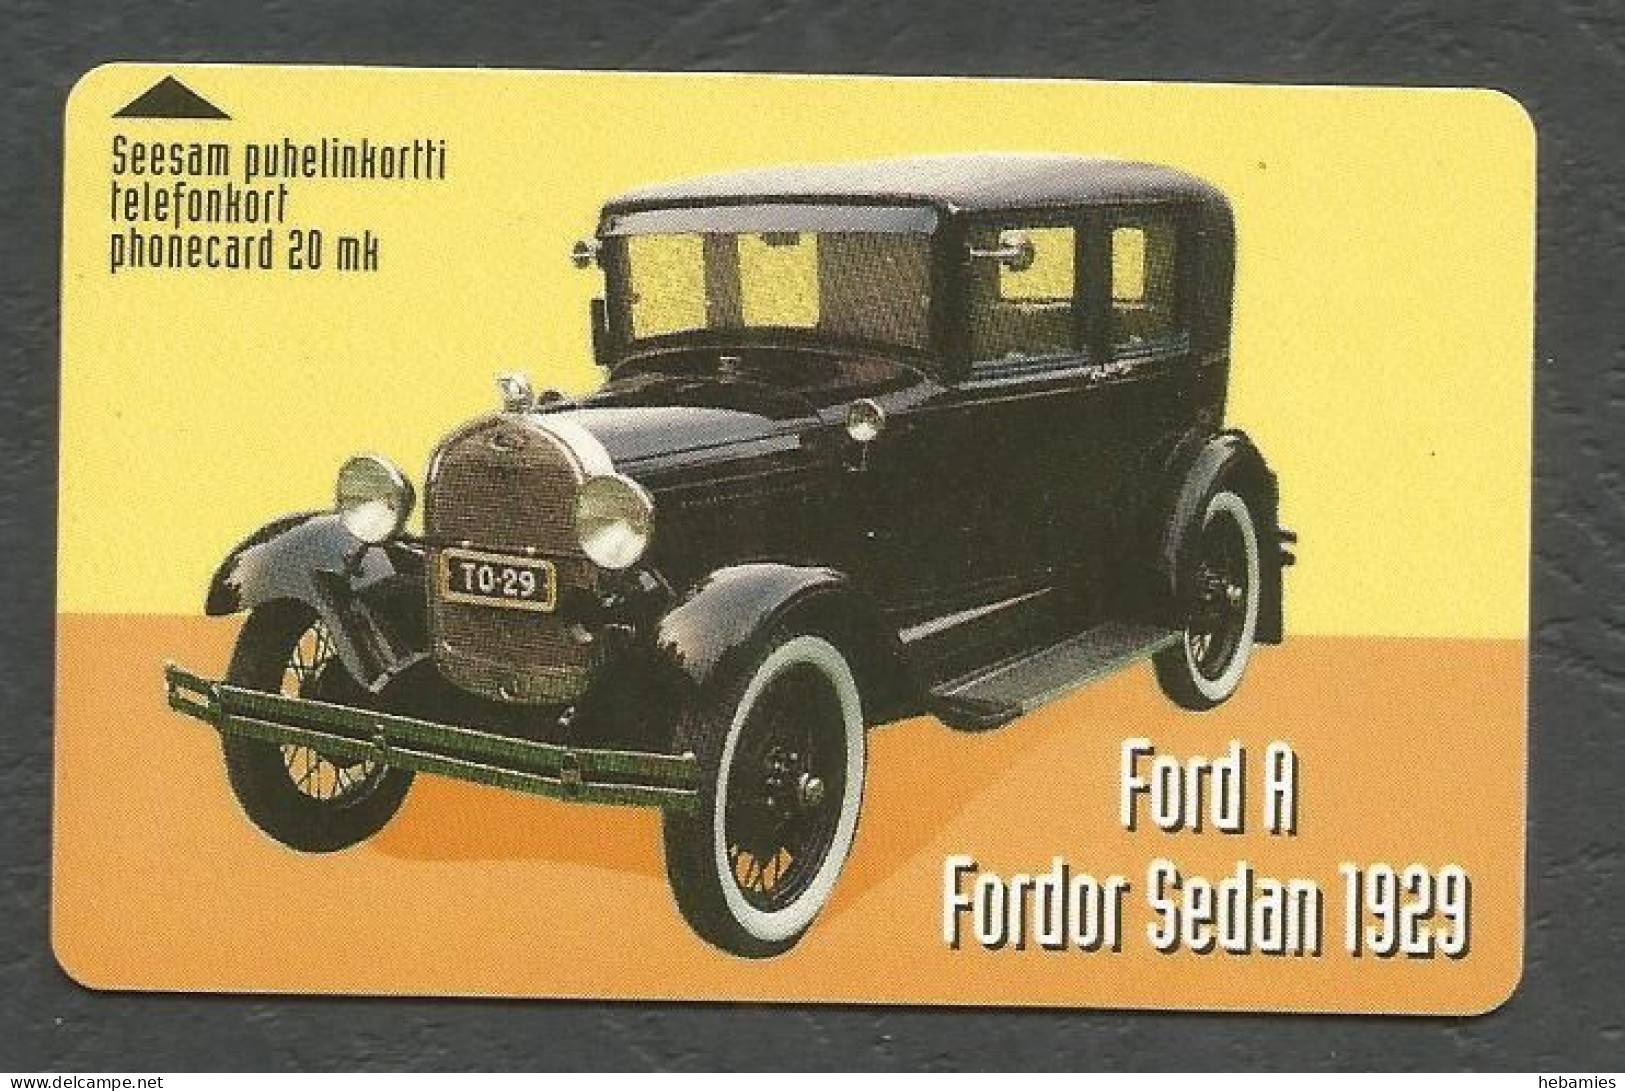 FORD  A FORDOR SEDAN 1929 - Magnetic Card -  20 FIM  FINNET - FINLAND - - Voitures